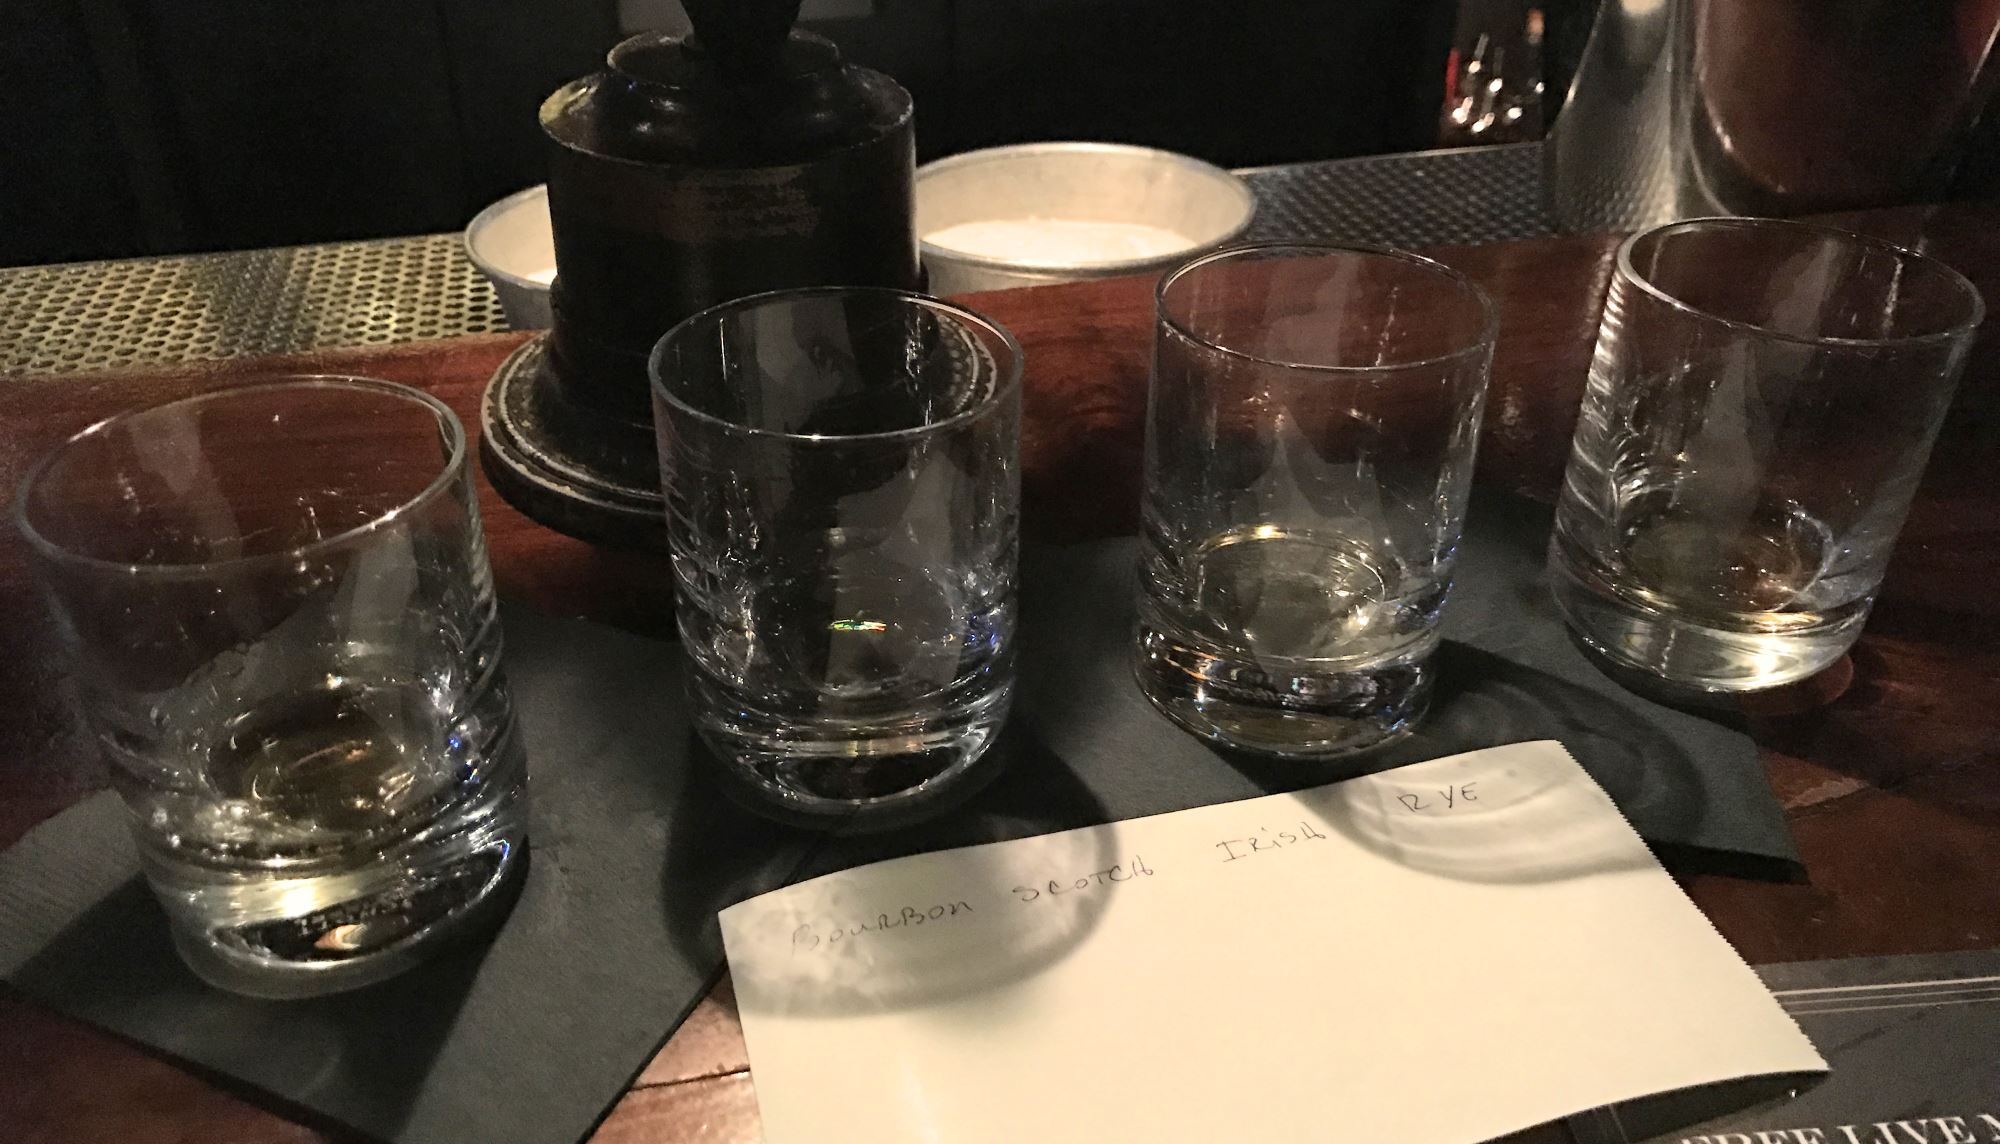 A flight of various Whiskeys at Seven Grand in Downtown LA